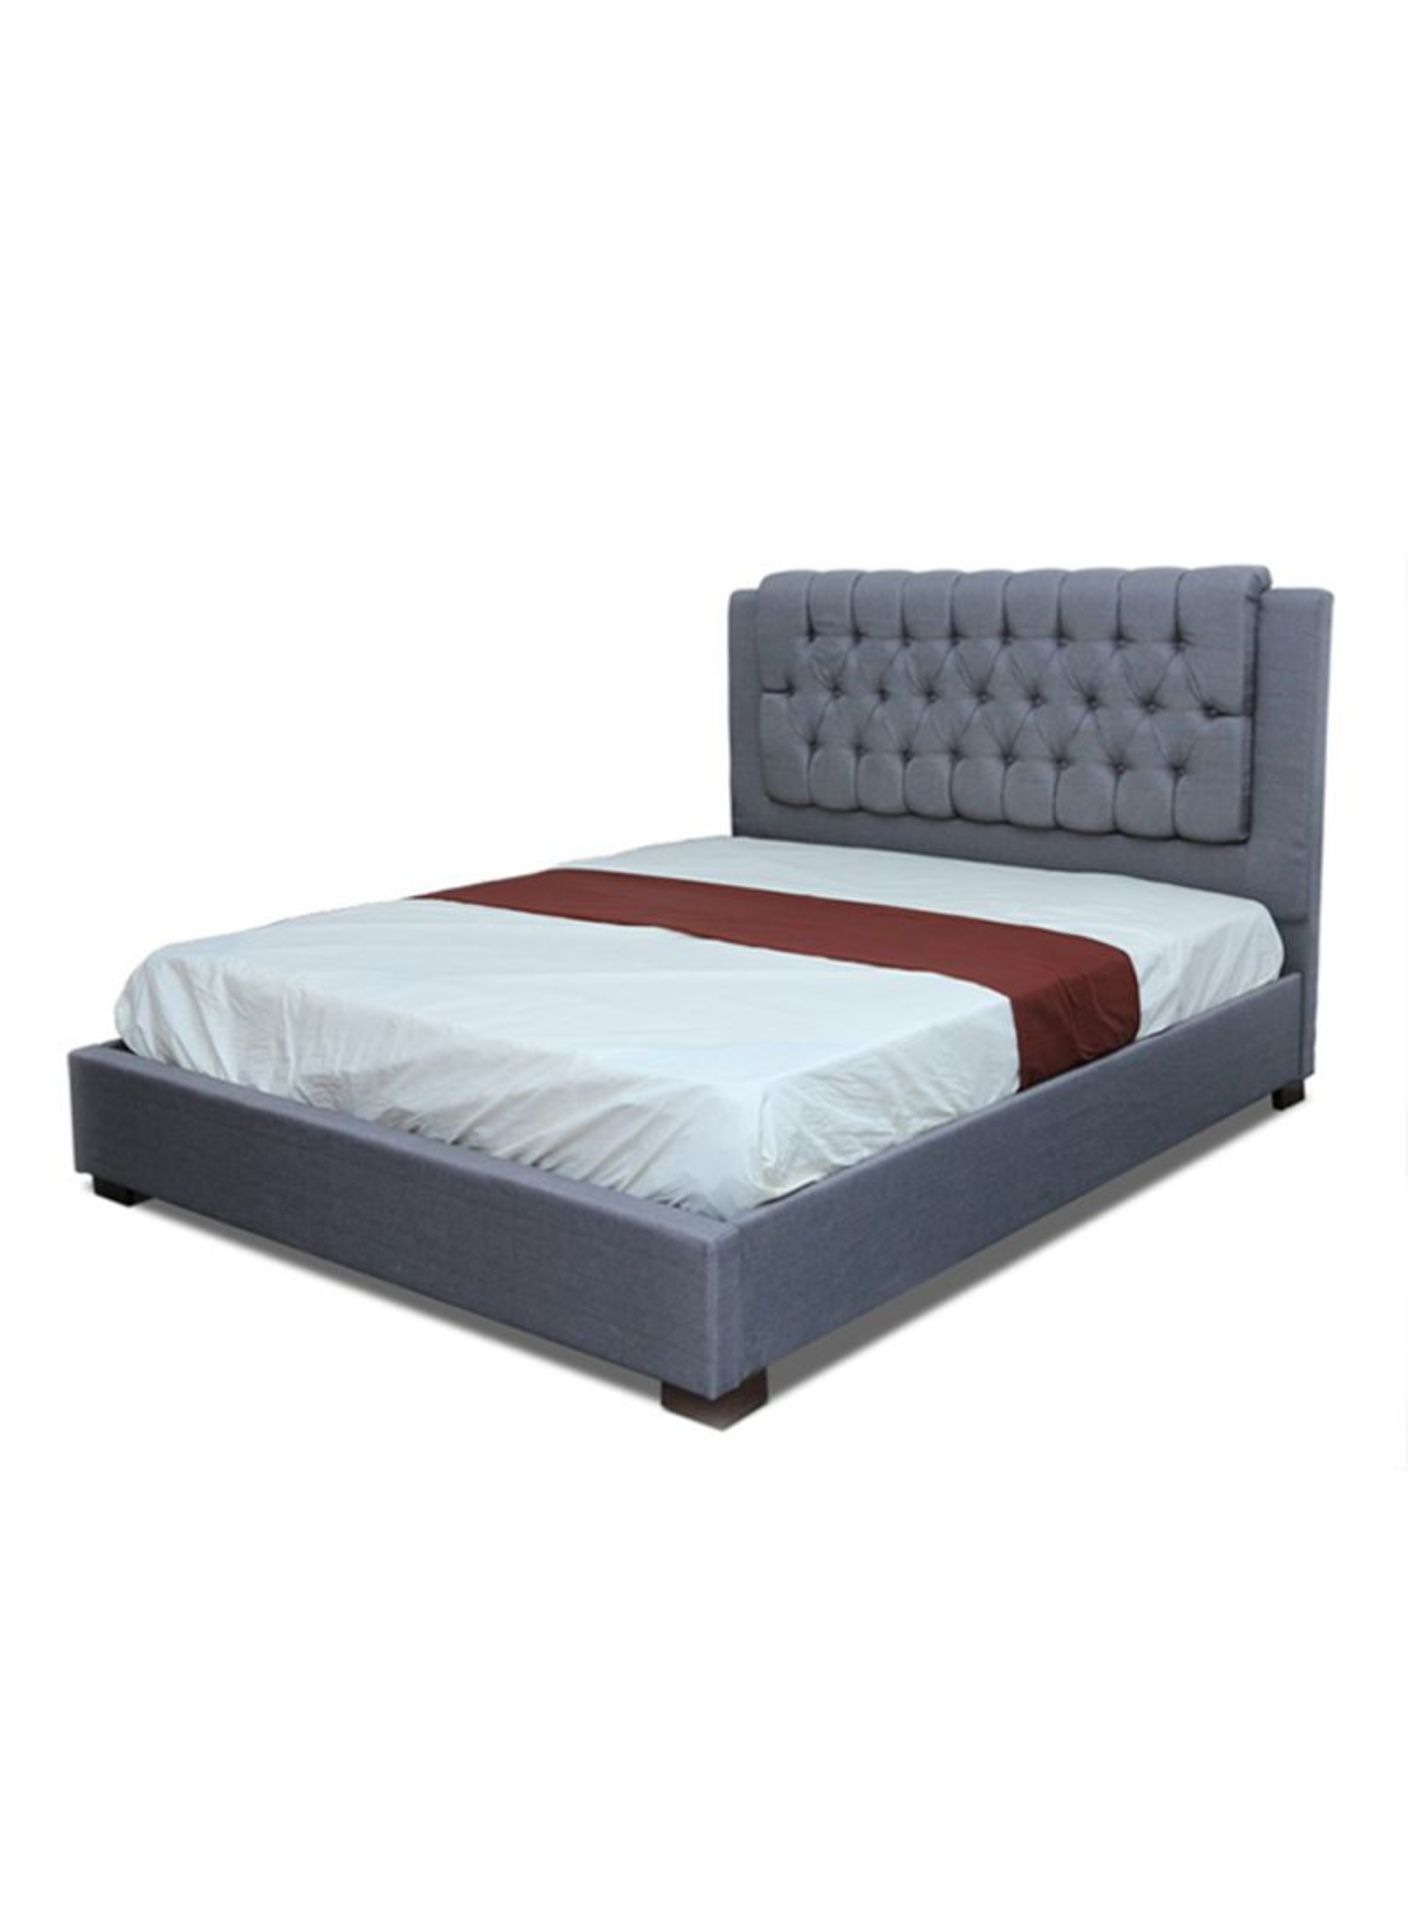 Brand new boxed 4,6 double messidy bedstead in grey fabric